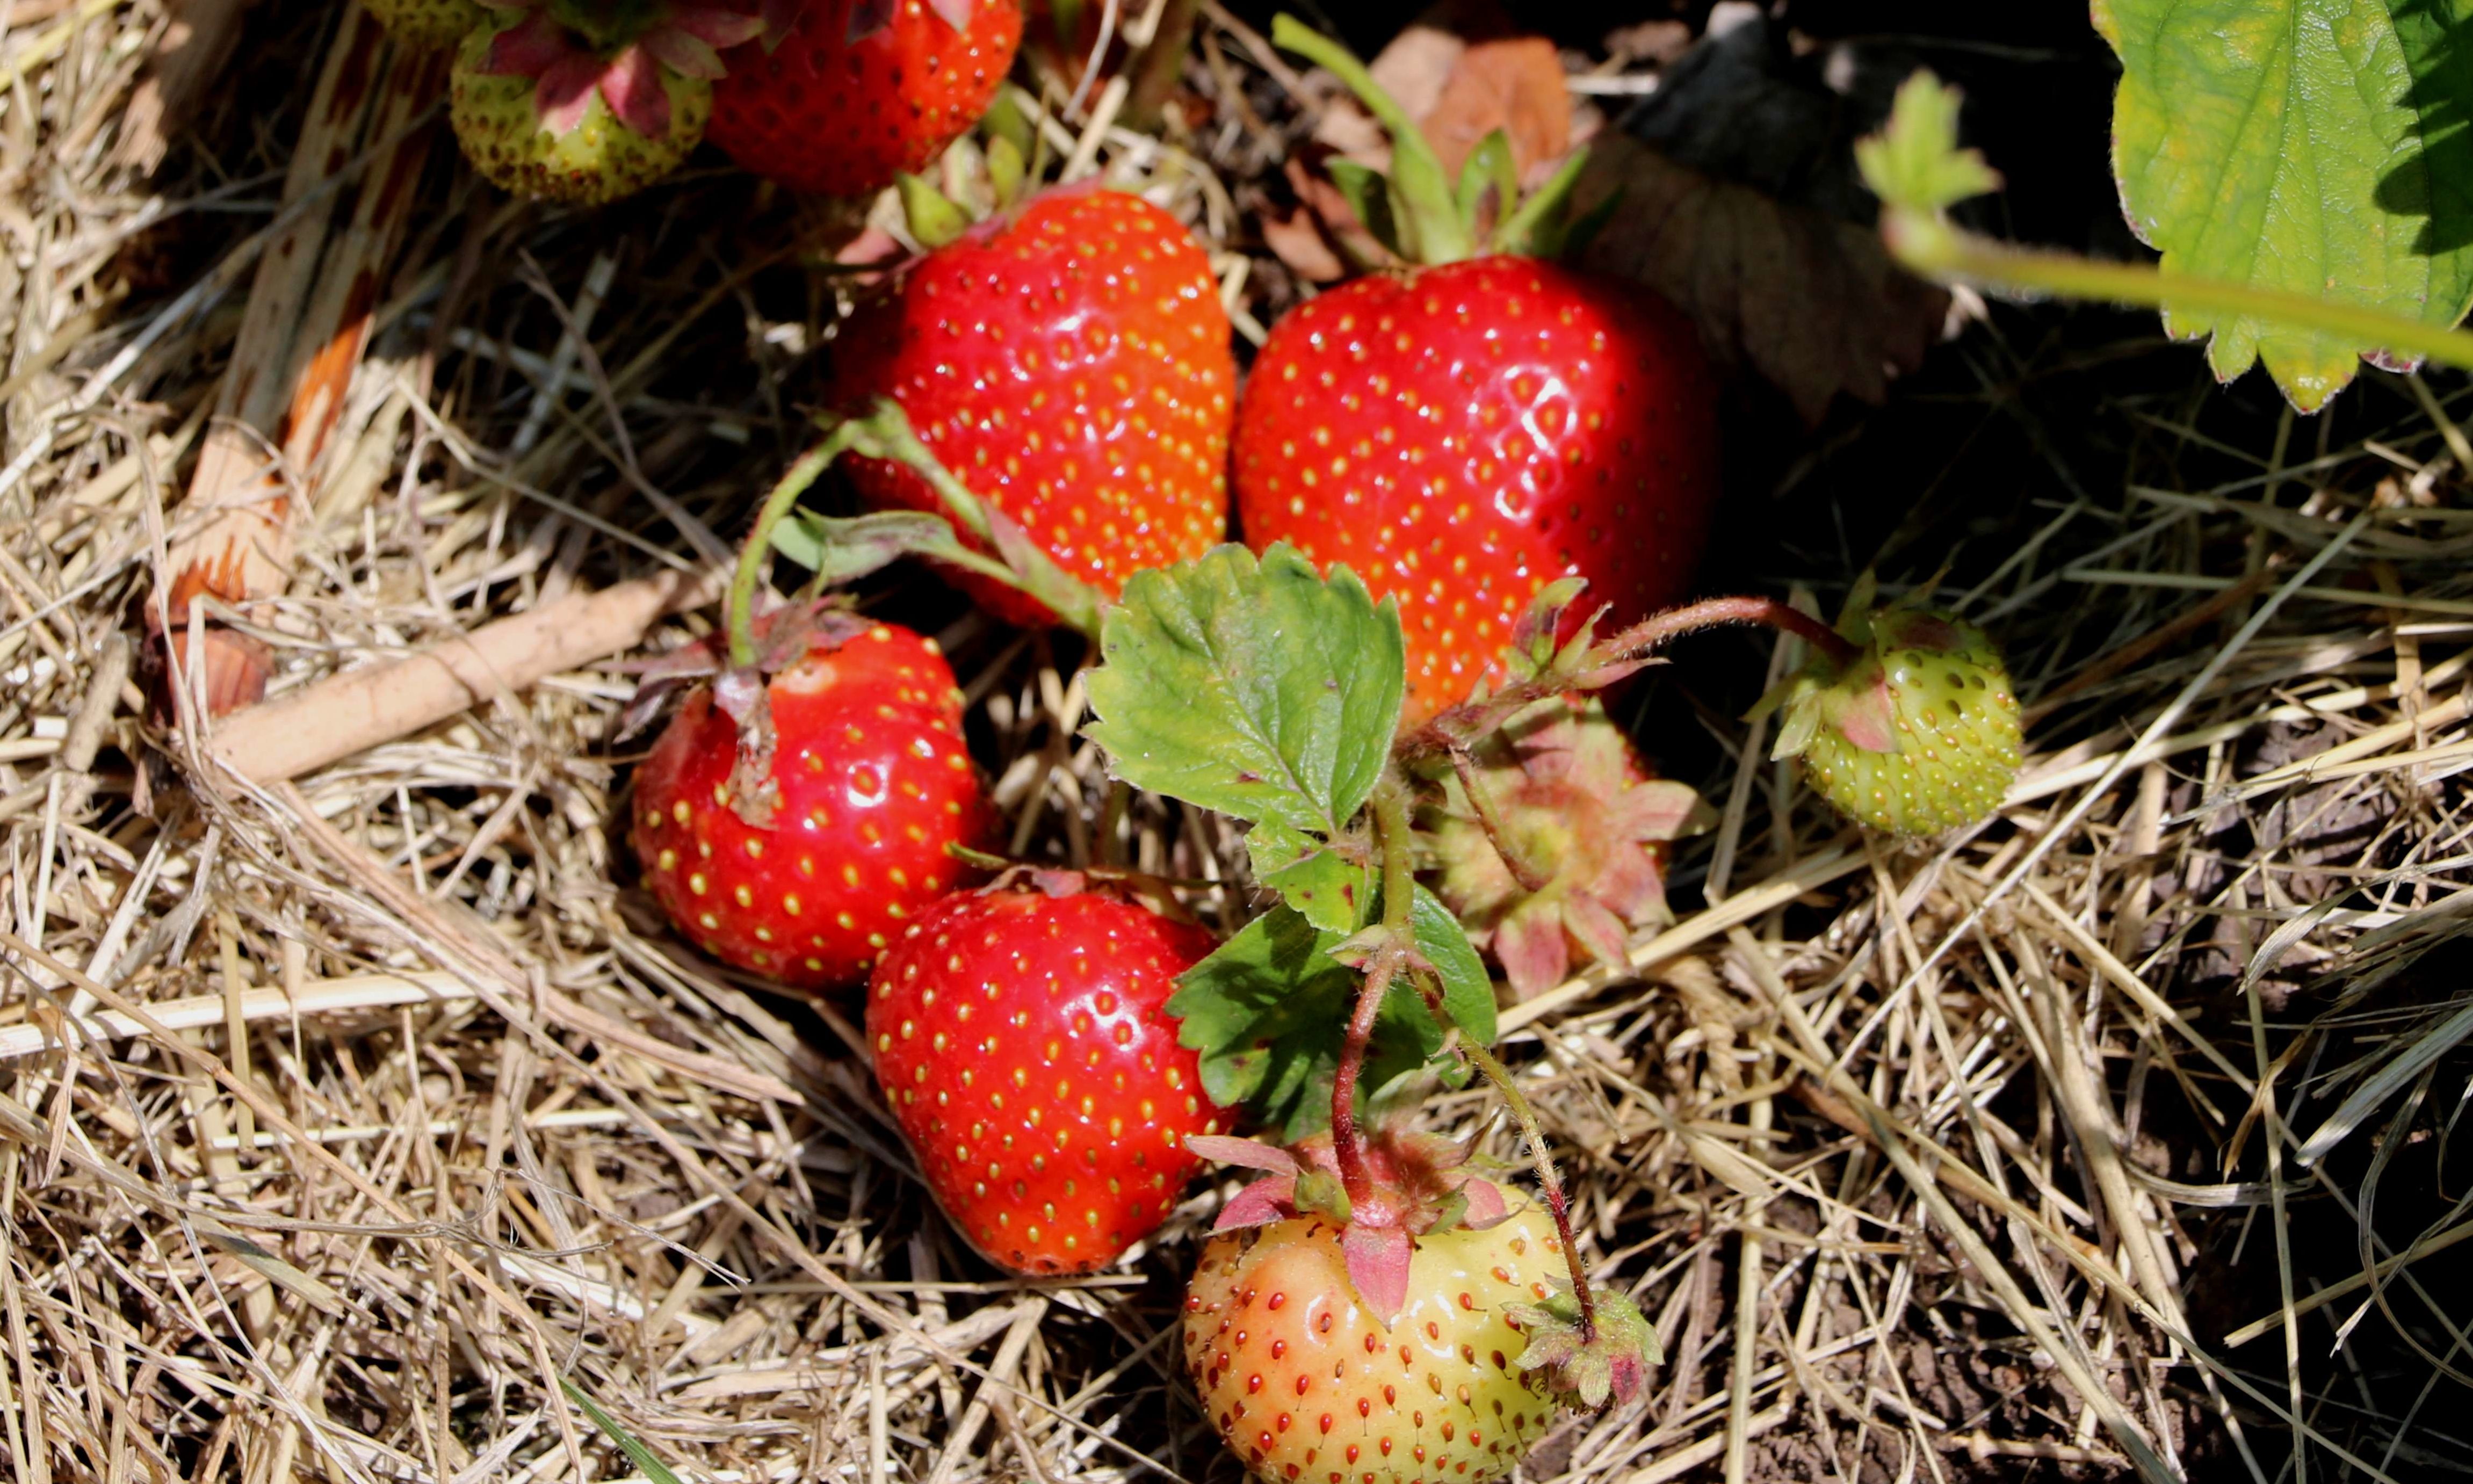 Strawberry Florence ready for picking.